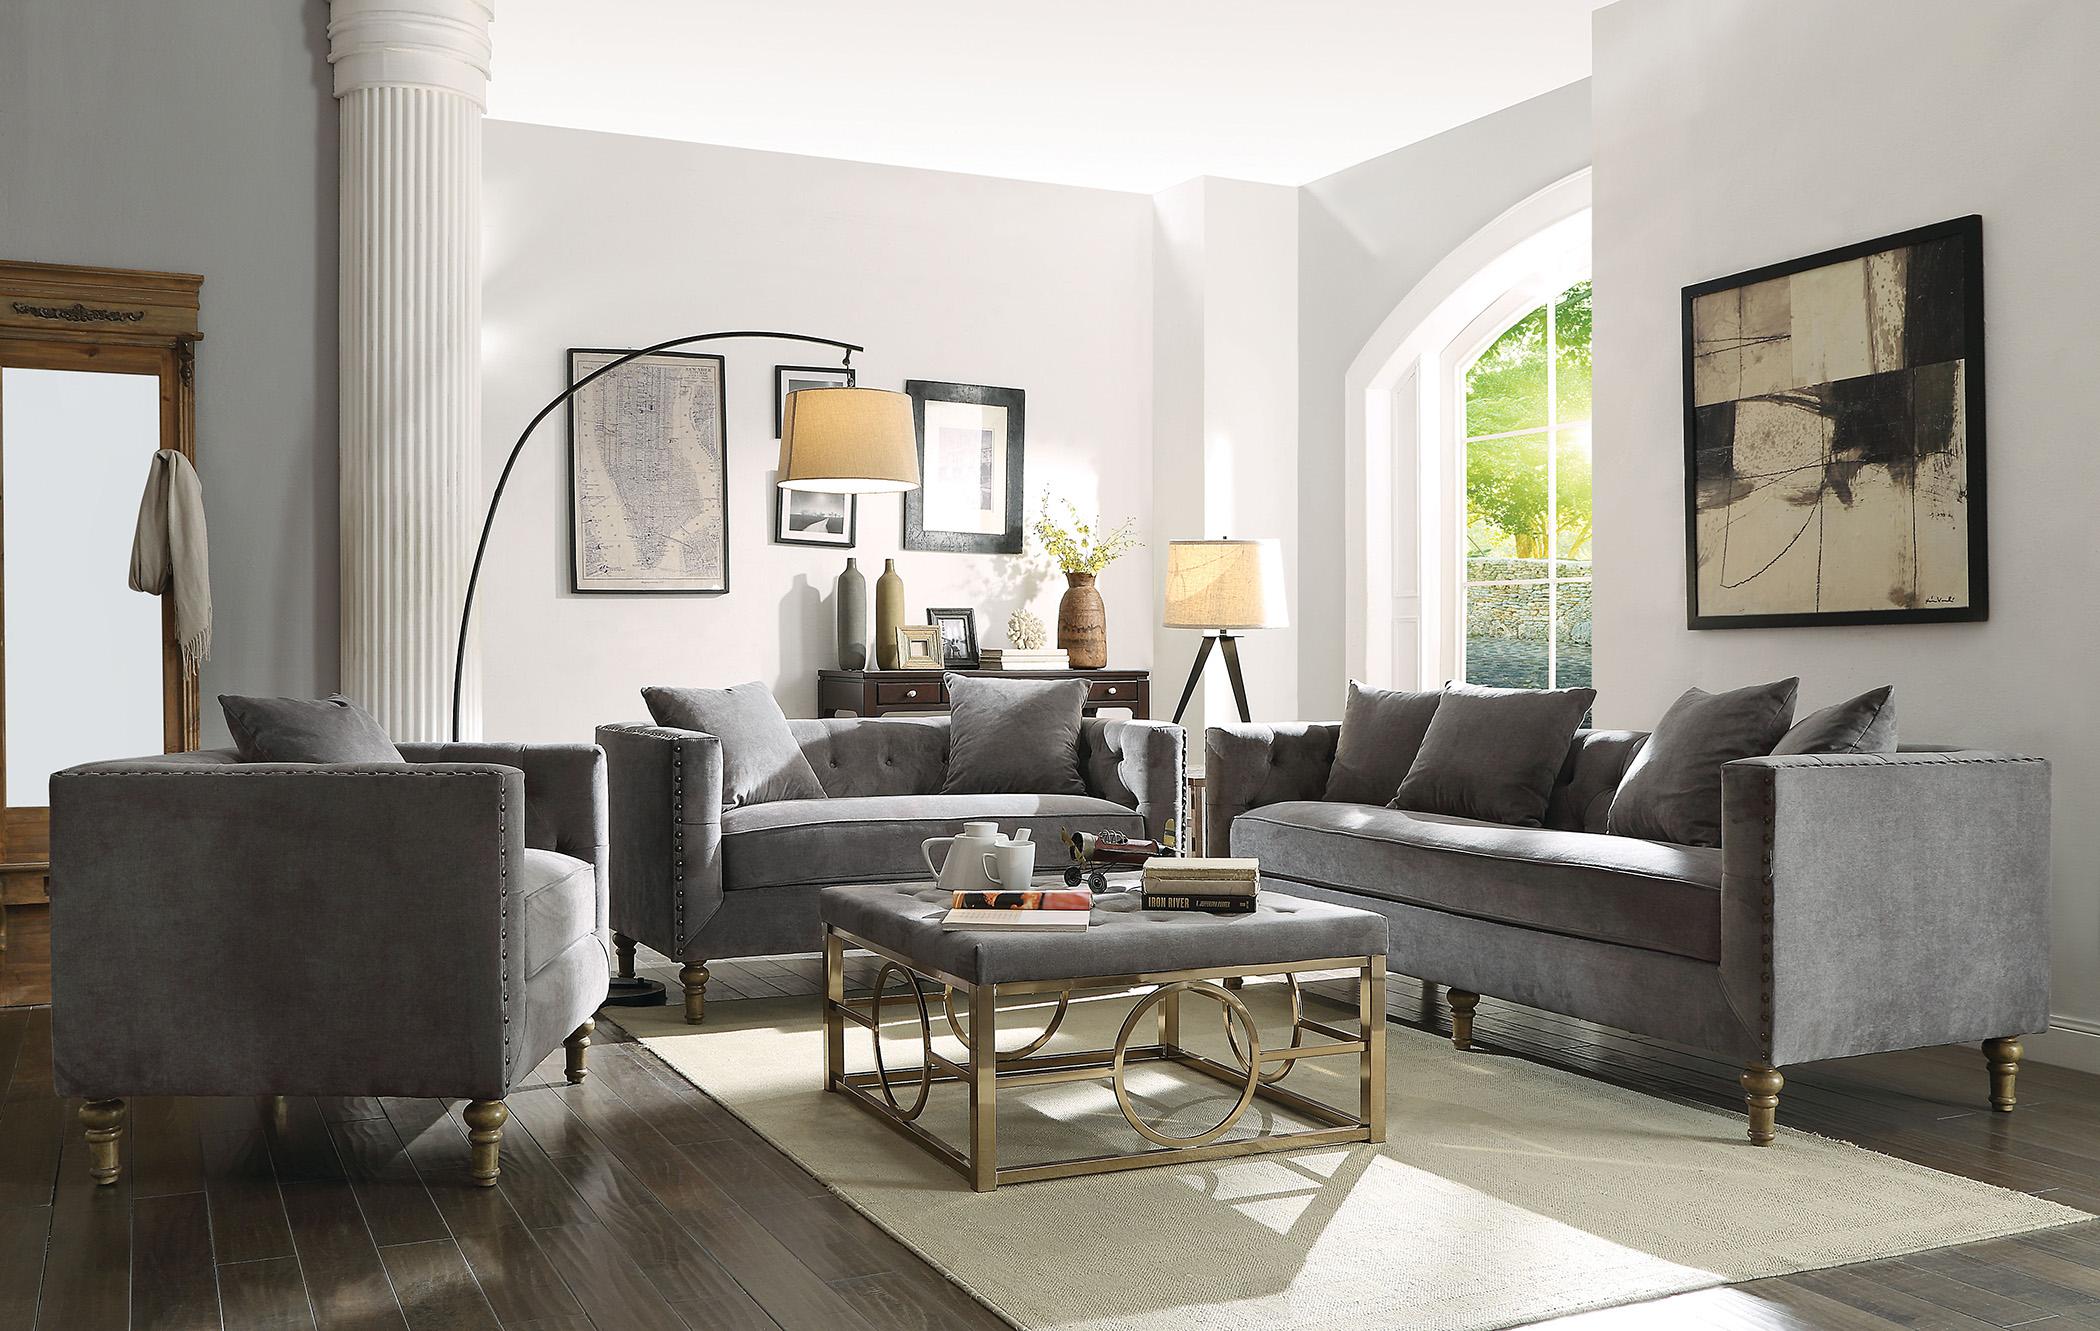 Contemporary, Classic Sofa Loveseat and Chair Set Sidonia Sidonia-53580-Set-3 in Gray Fabric